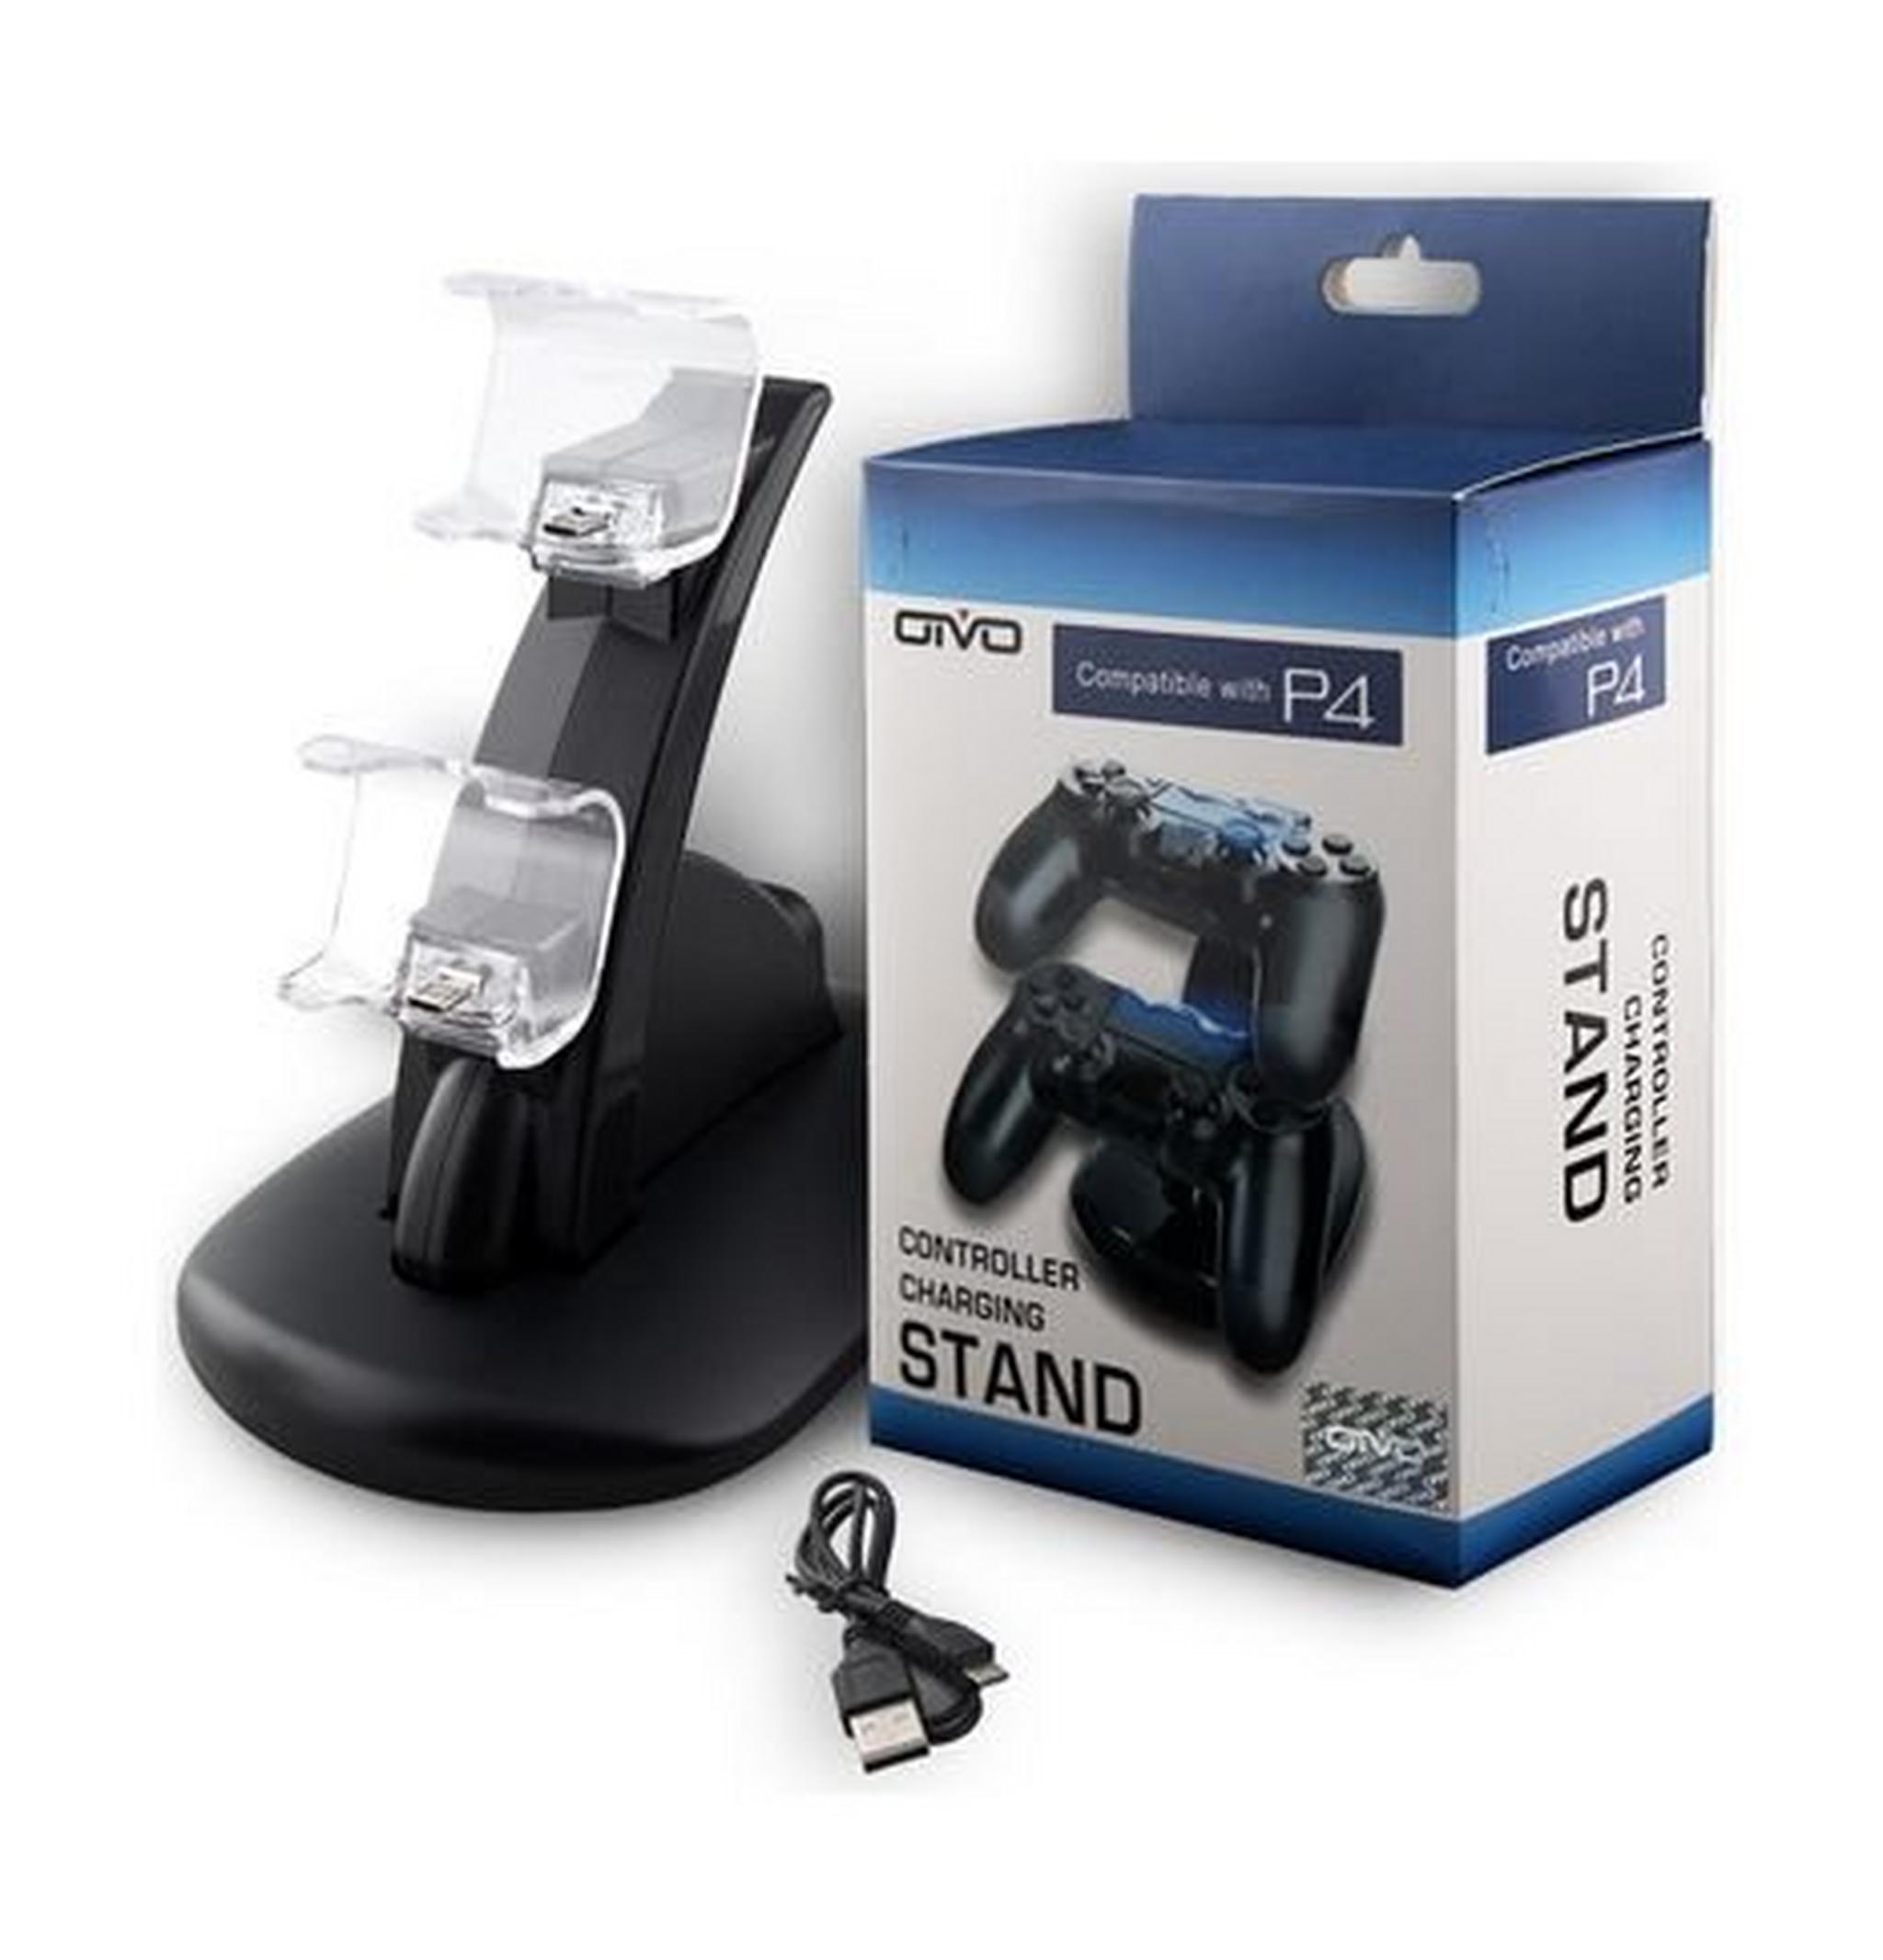 OIVO Dual Fast Charging Stand for PS4 Controller